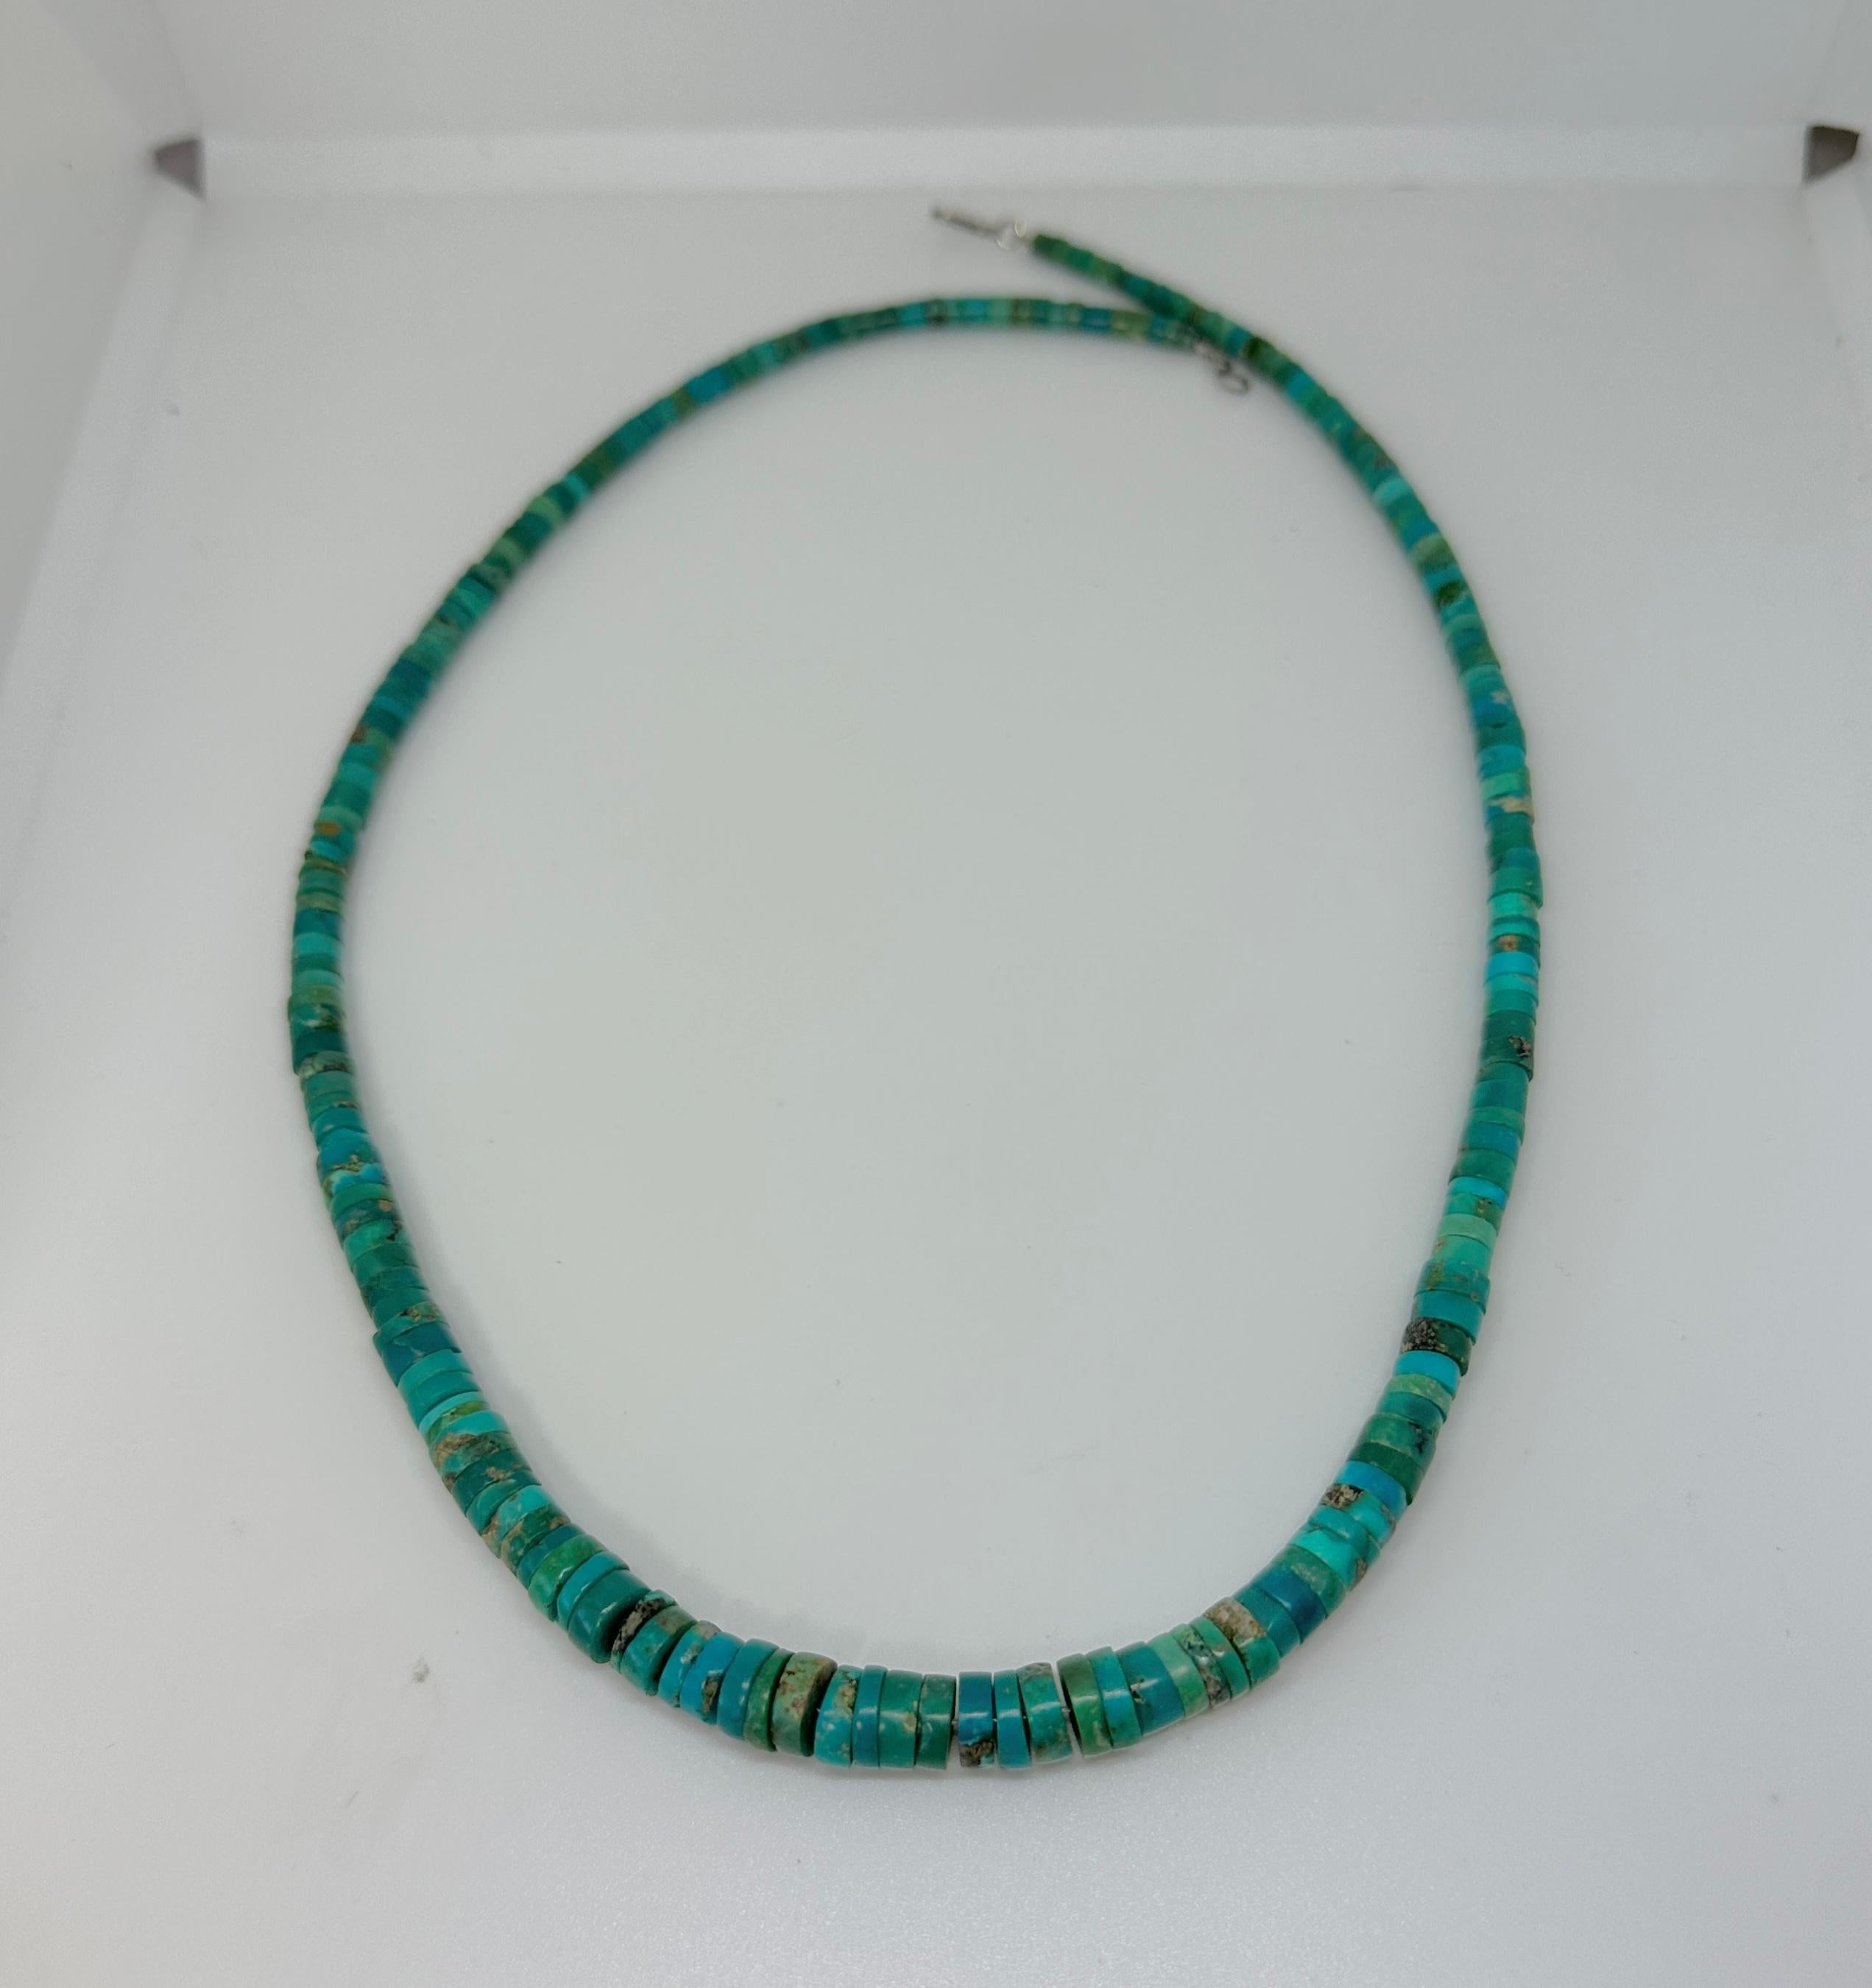 Early Santo Domingo Pueblo Greasy Caribbean Blue Green Heishi Turquoise Necklace For Sale 2